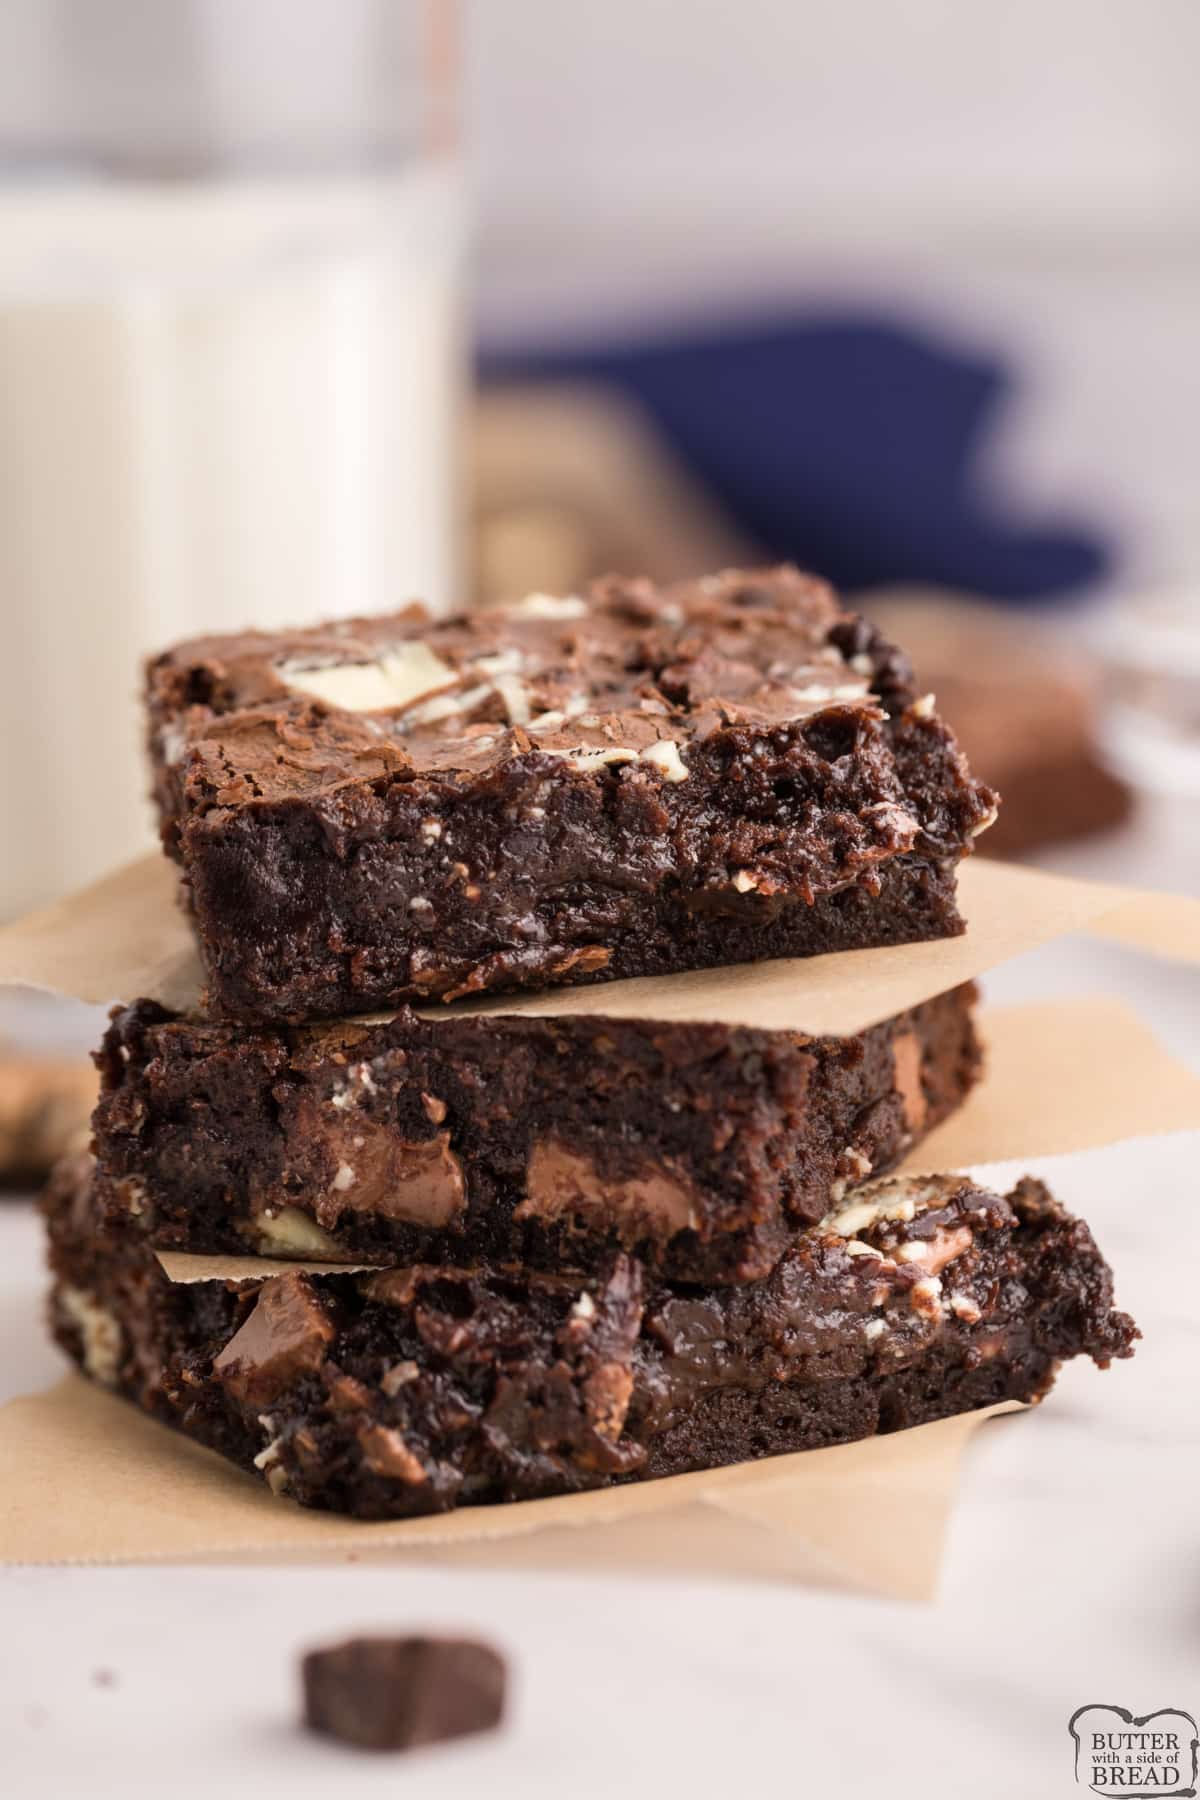 Triple Chocolate Brownies are made with melted semi-sweet chocolate and chunks of milk chocolate and white chocolate. The perfect brownie recipe for chocolate lovers!